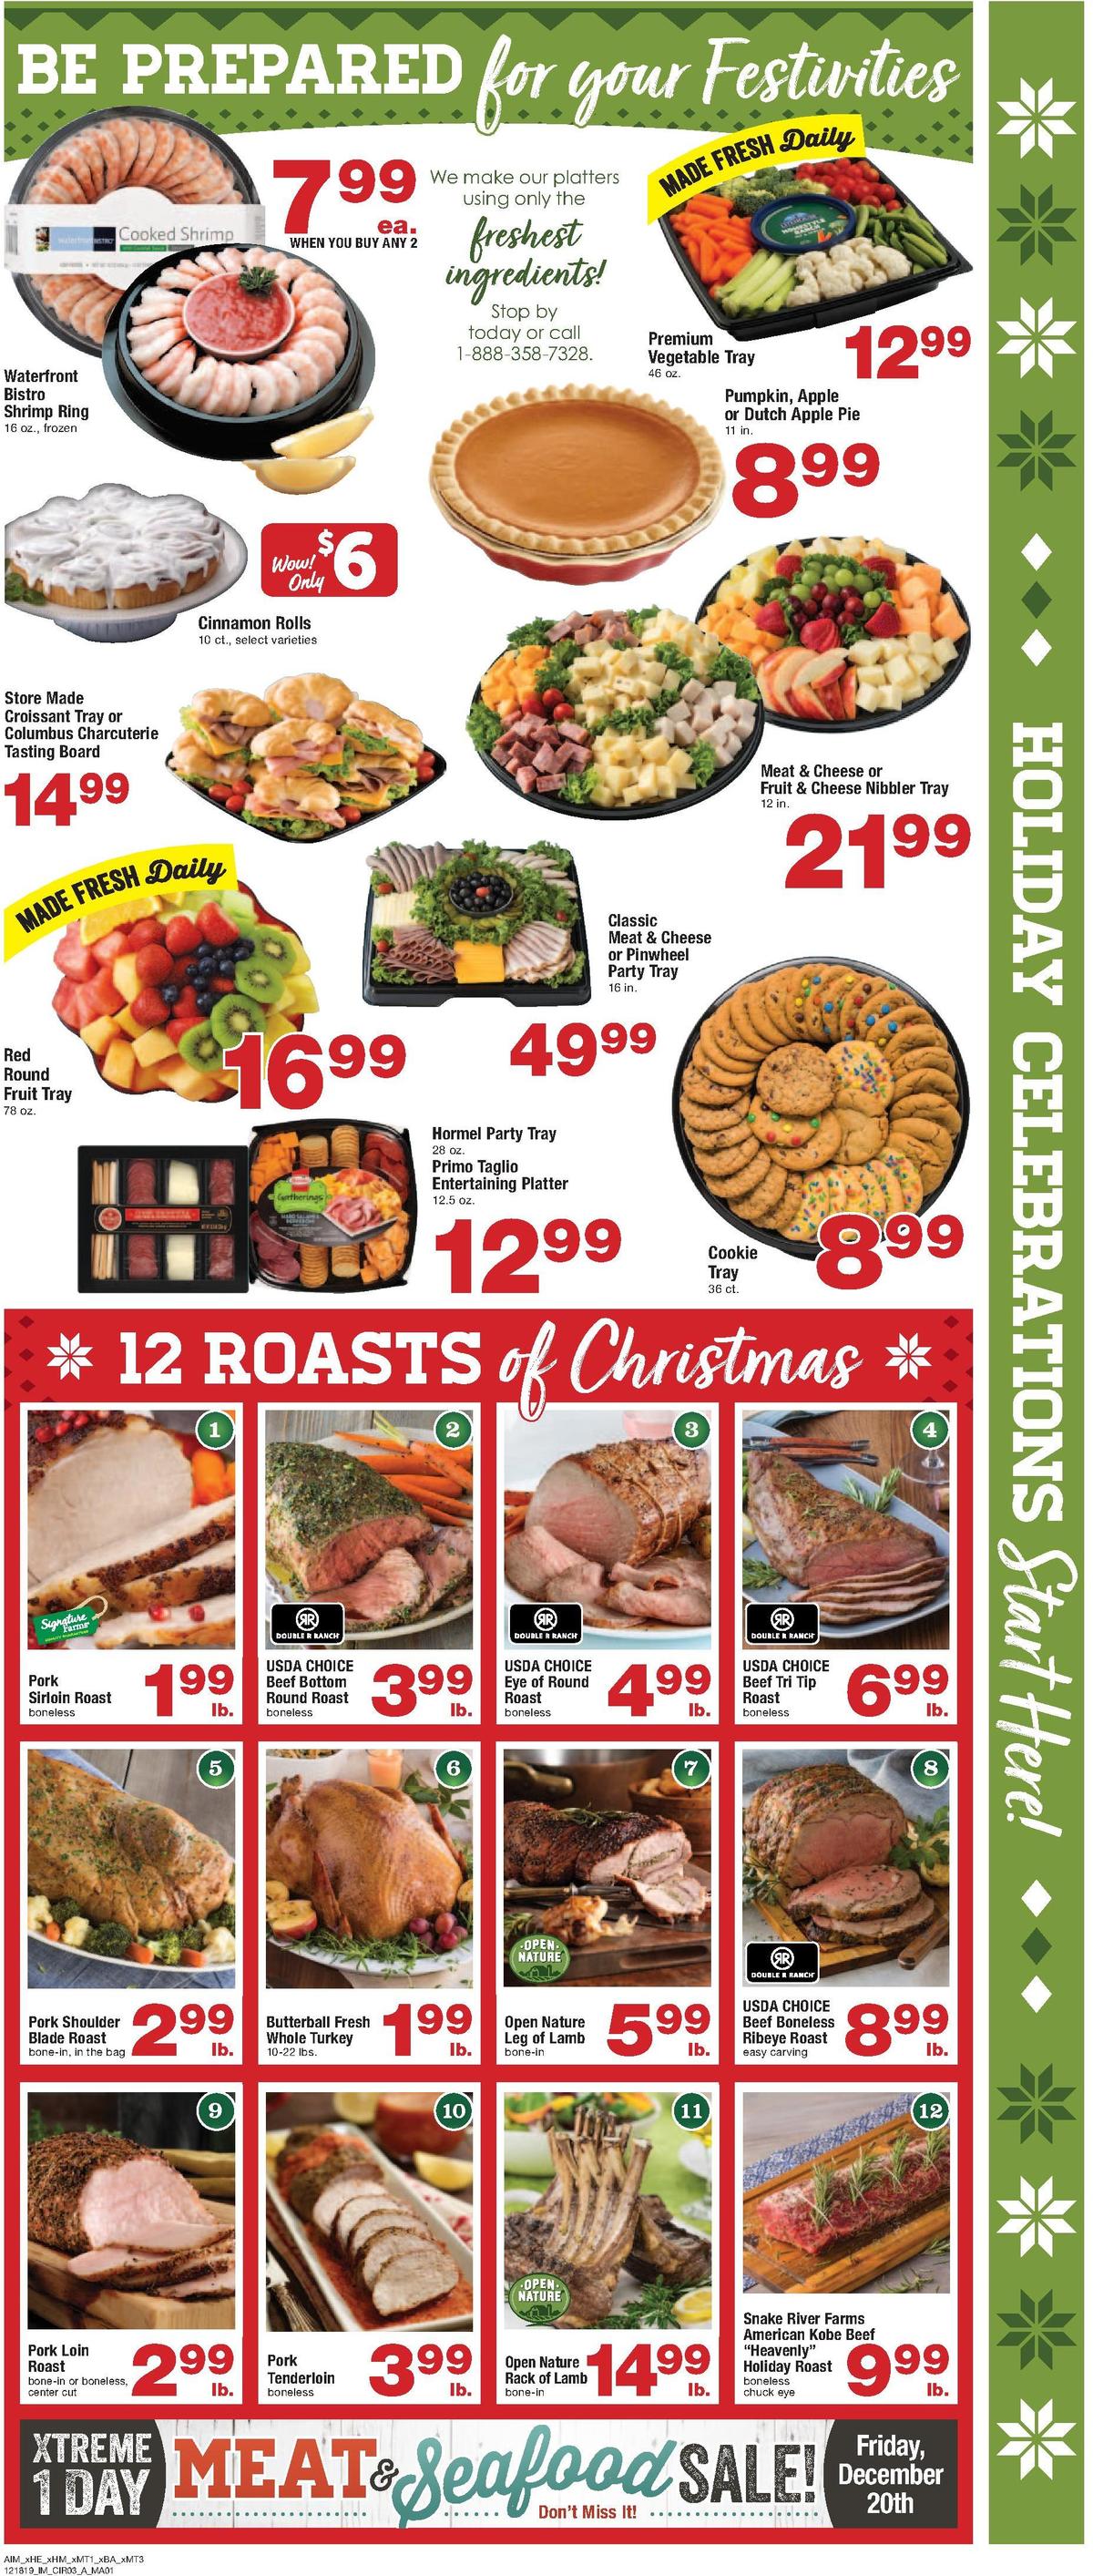 Albertsons Weekly Ad from December 18